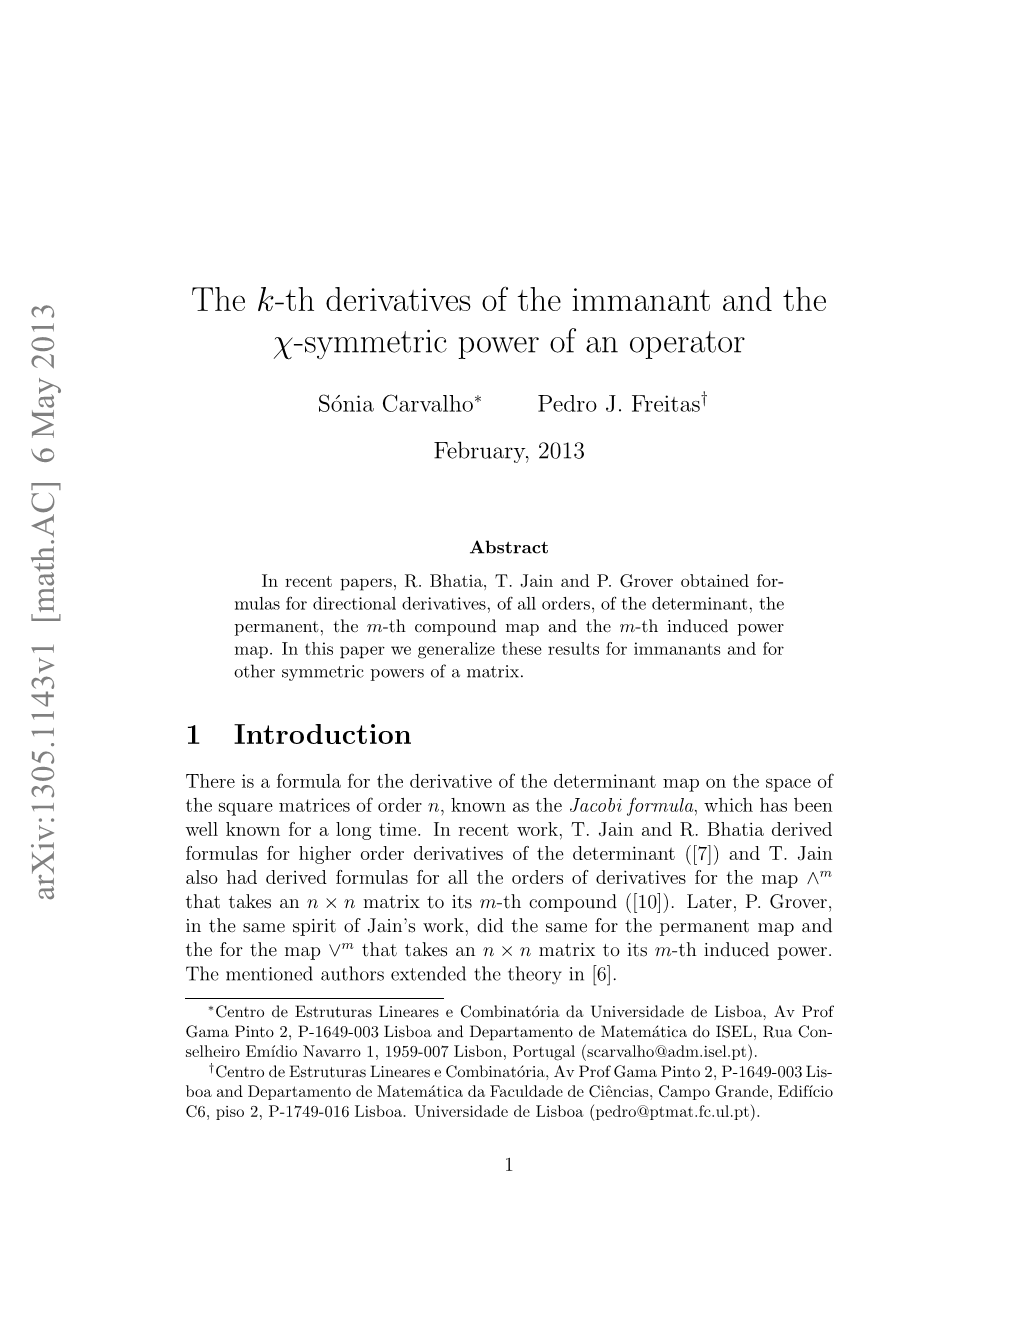 The $ K $-Th Derivatives of the Immanant and the $\Chi $-Symmetric Power of an Operator